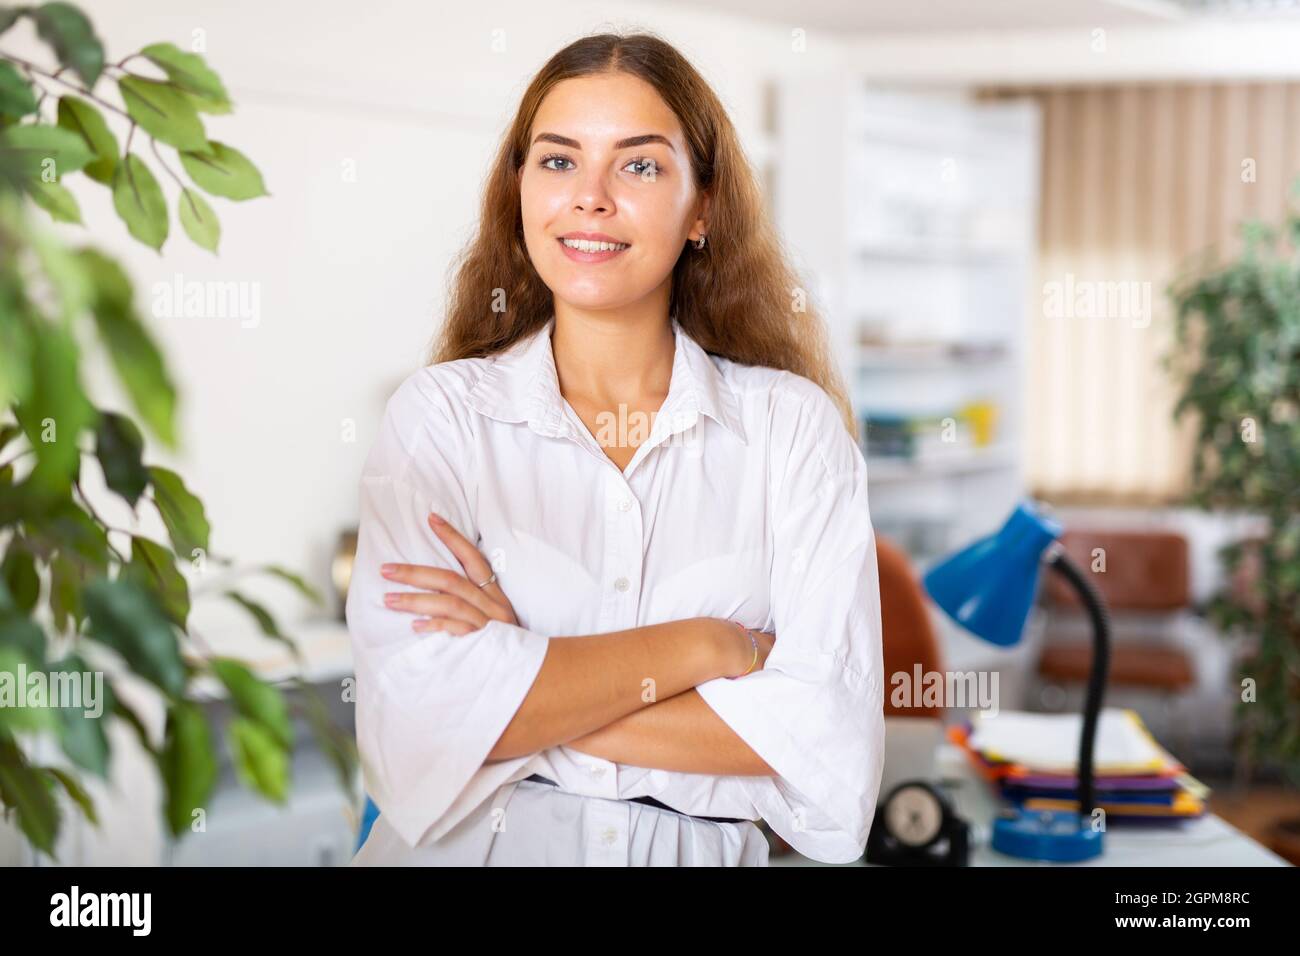 Portrait of young female clerical worker Stock Photo